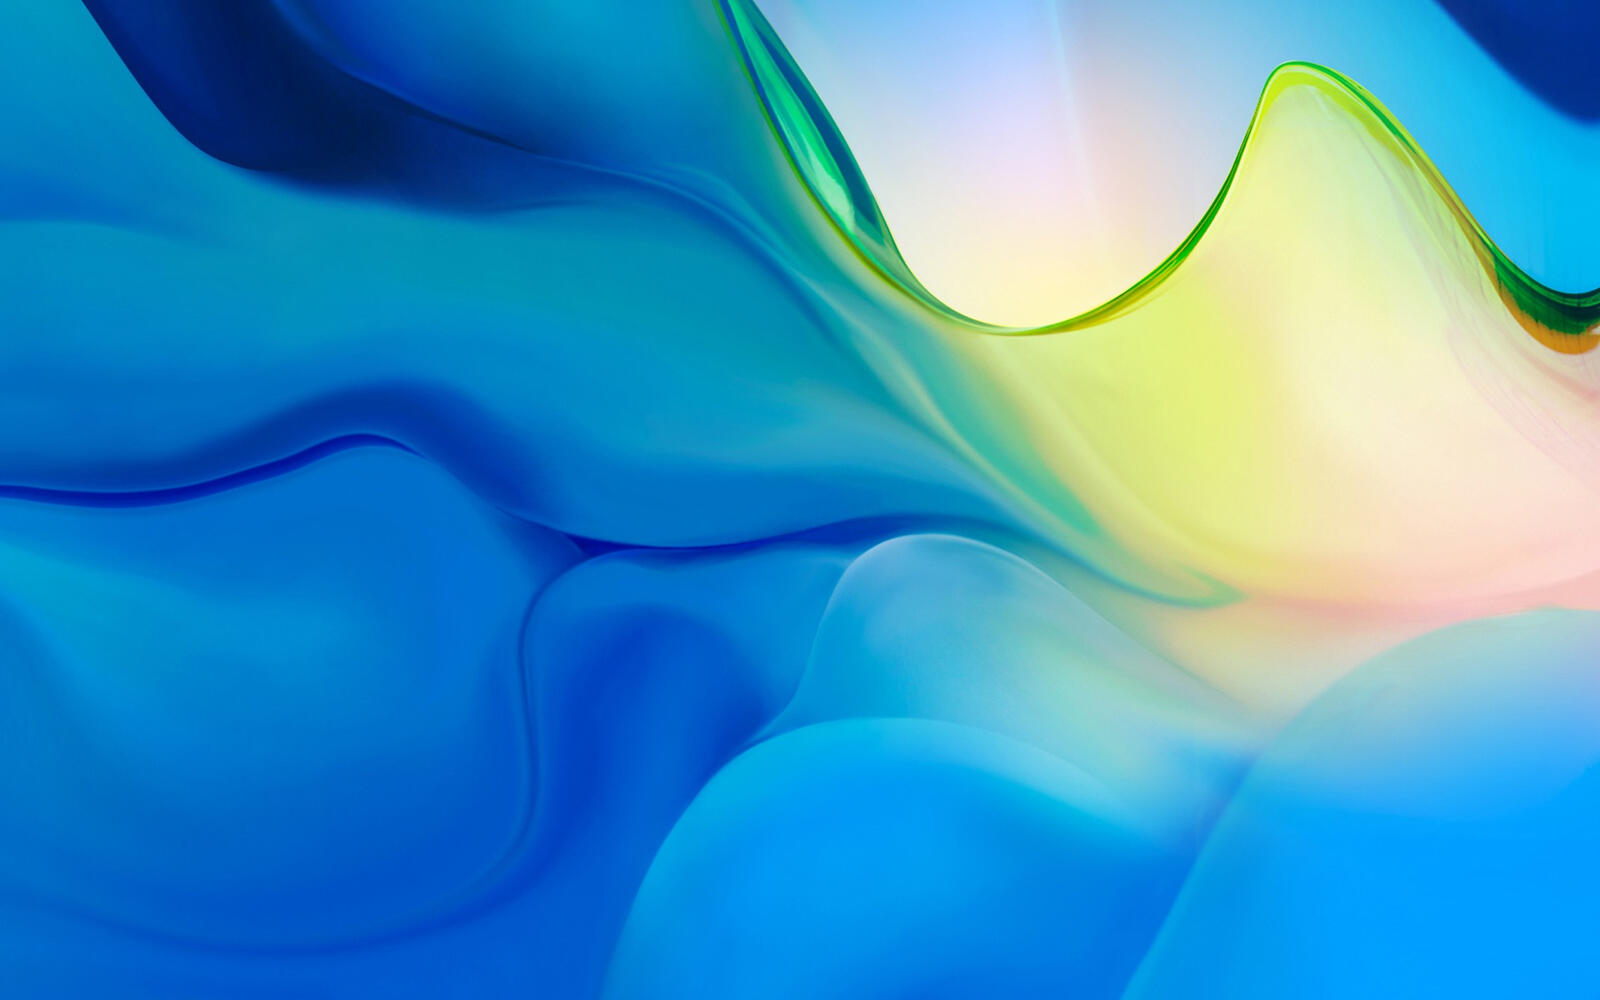 Wallpapers wallpaper blue waves huawei p30 pro stock photo lines on the desktop